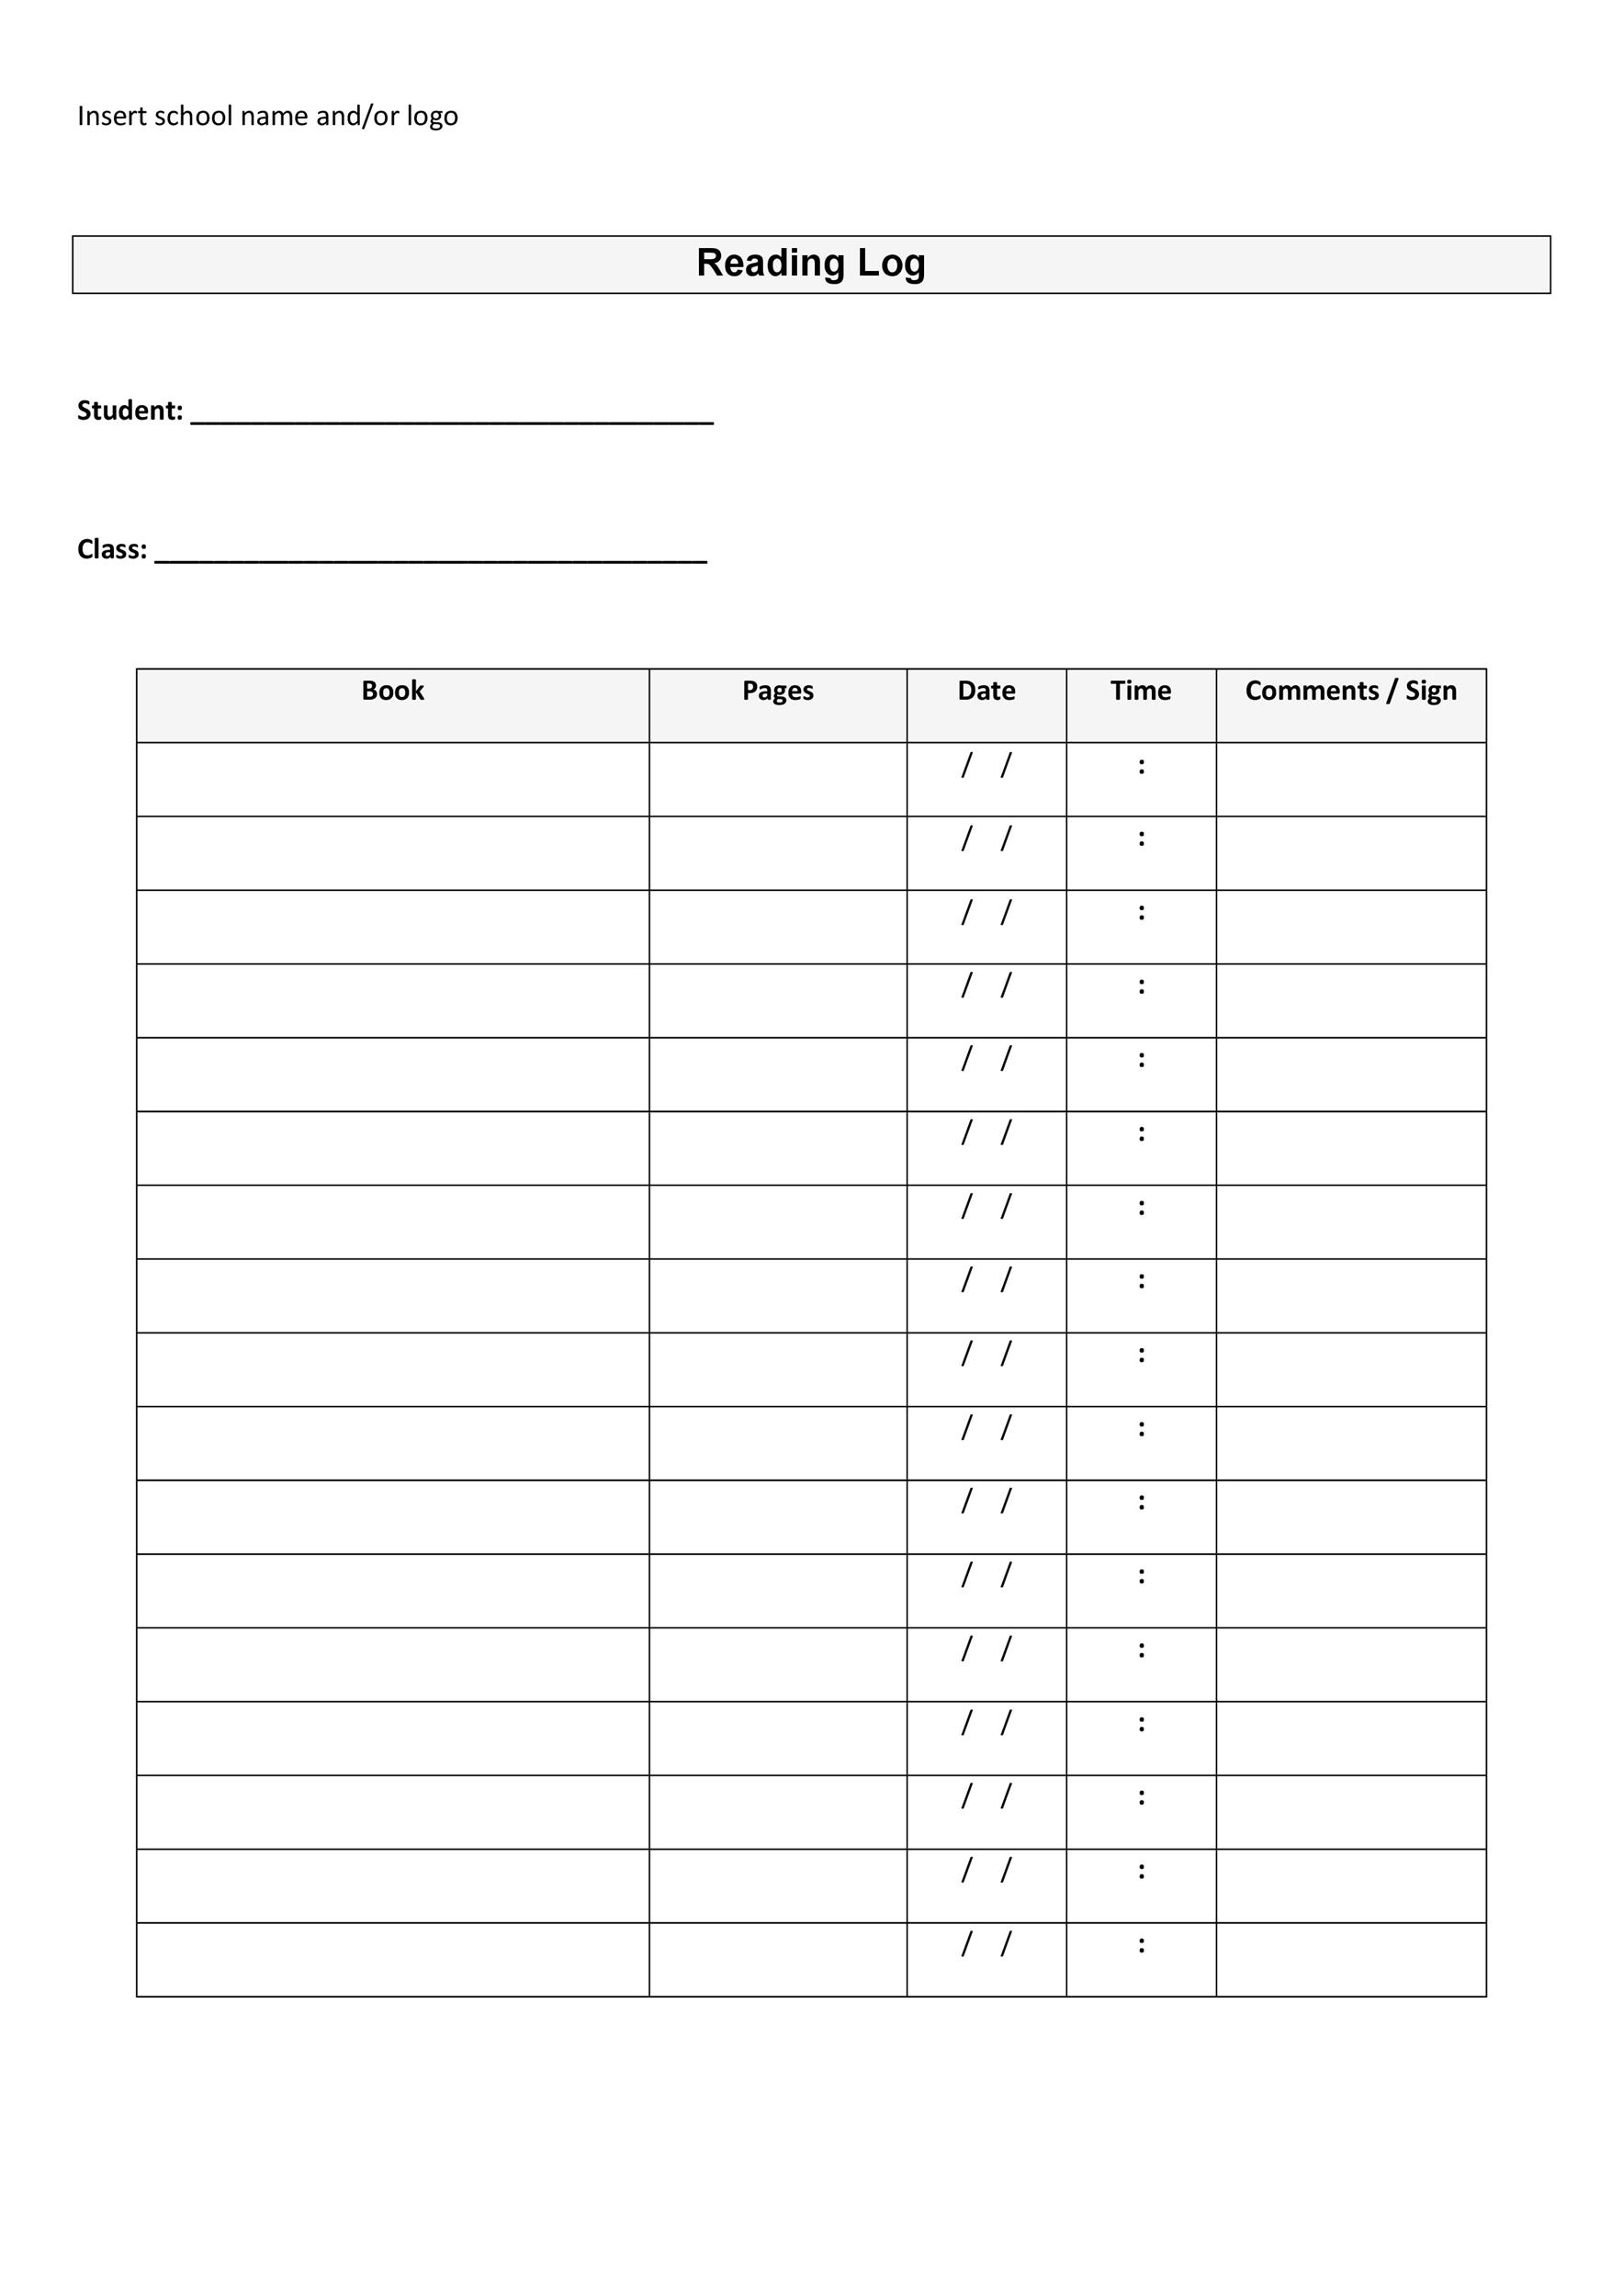 Monitor Reading Log Worksheet | Printable Worksheets And in Middle School Reading Log Template